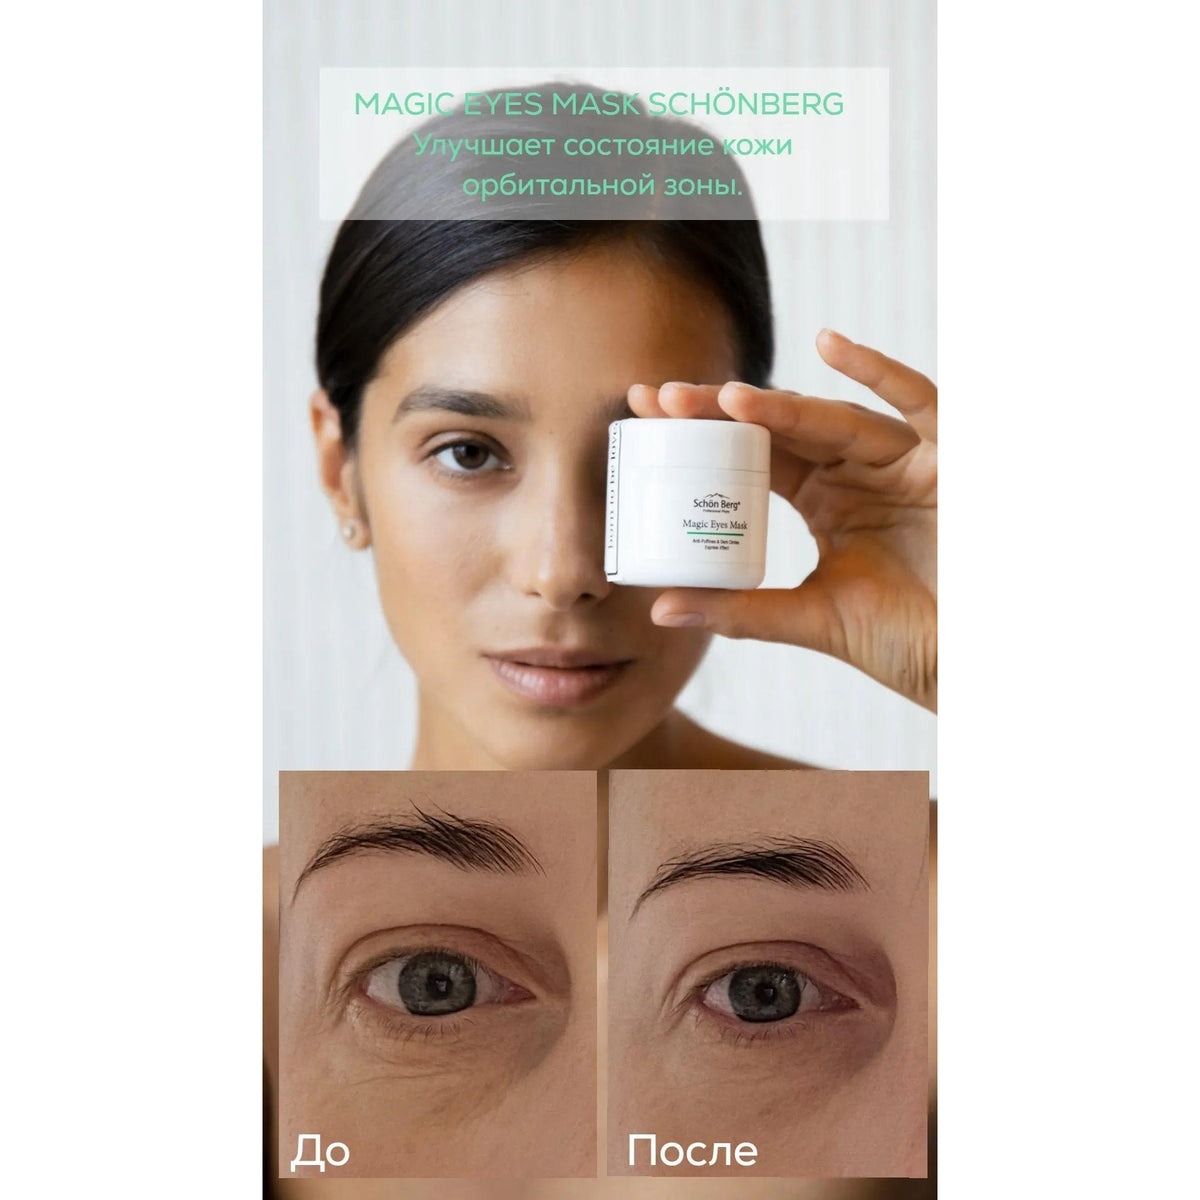 schonberg magic eyes mask before and after